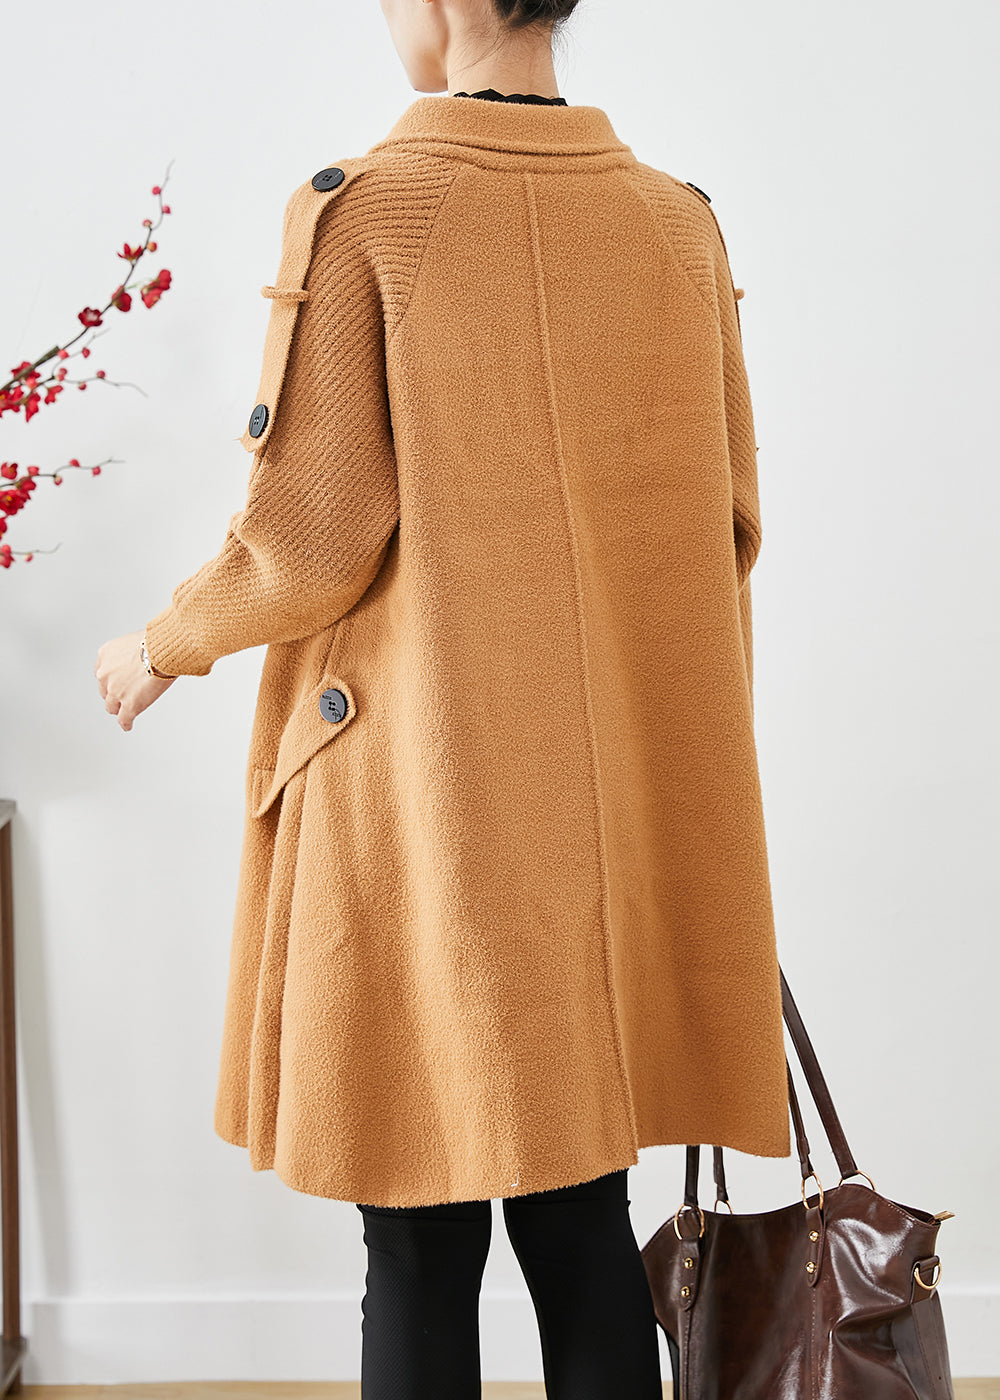 Boho Light Camel Double Breast Patchwork Knit Woolen Trench Coats Fall Ada Fashion